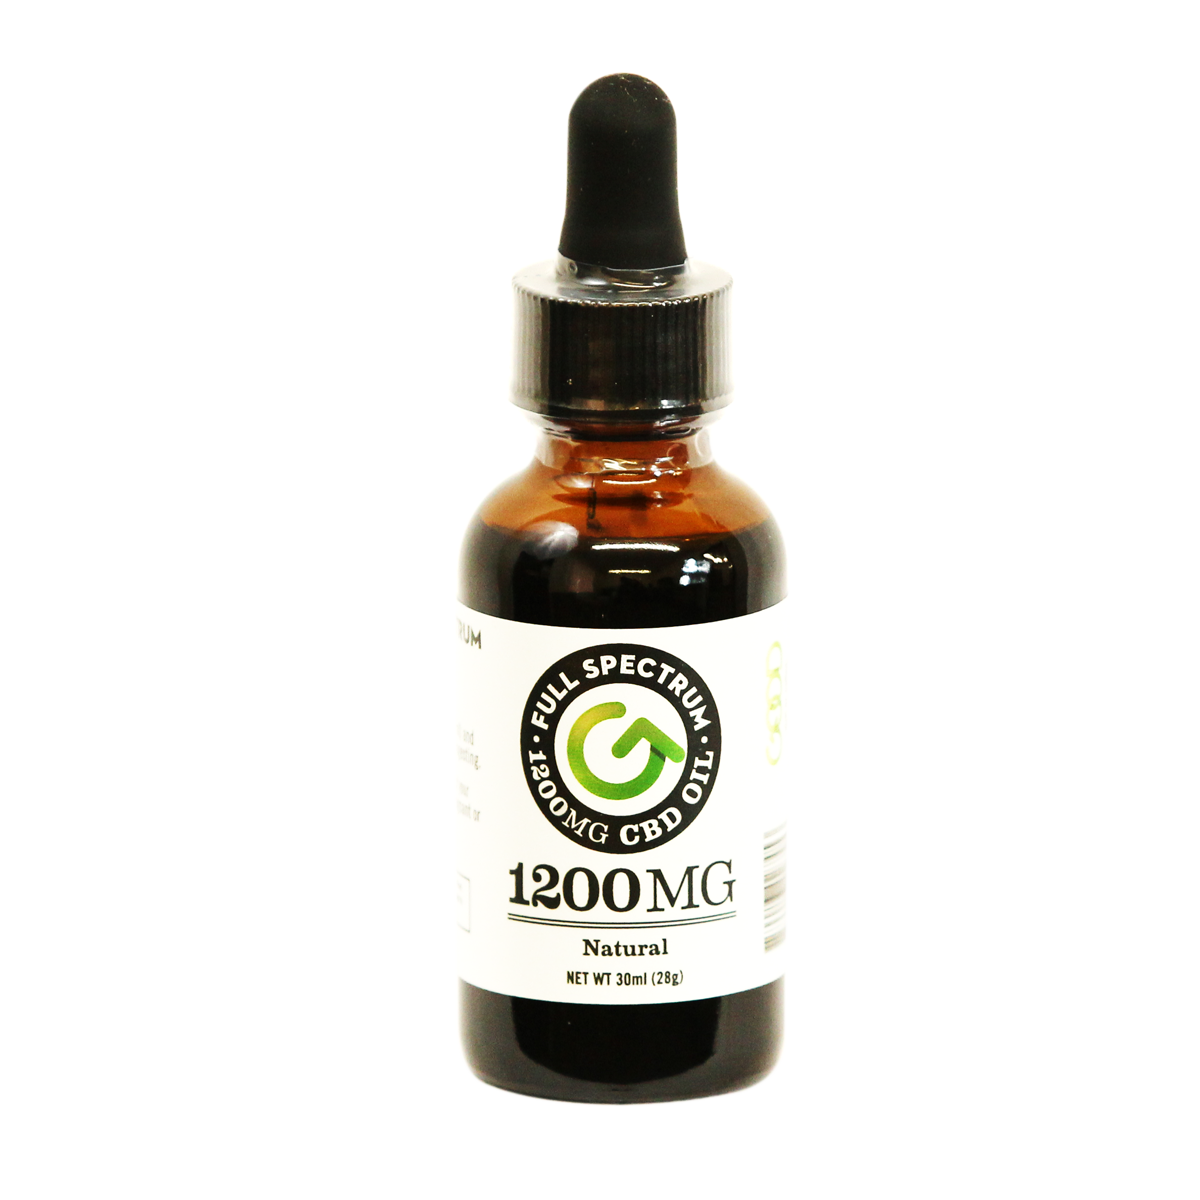 Full Spectrum CBD Oils are available at GoodCBD.com.  We specialize in delta 8 carts, delta 8 gummies, delta 8 oil, and delta 8 flower.  Our website carries brands such as: 3CHI, Good CBD, Urb, Injoy Extracts, AiroPro, Delta Effex, and more.  Free shipping on orders $50.00 or more.